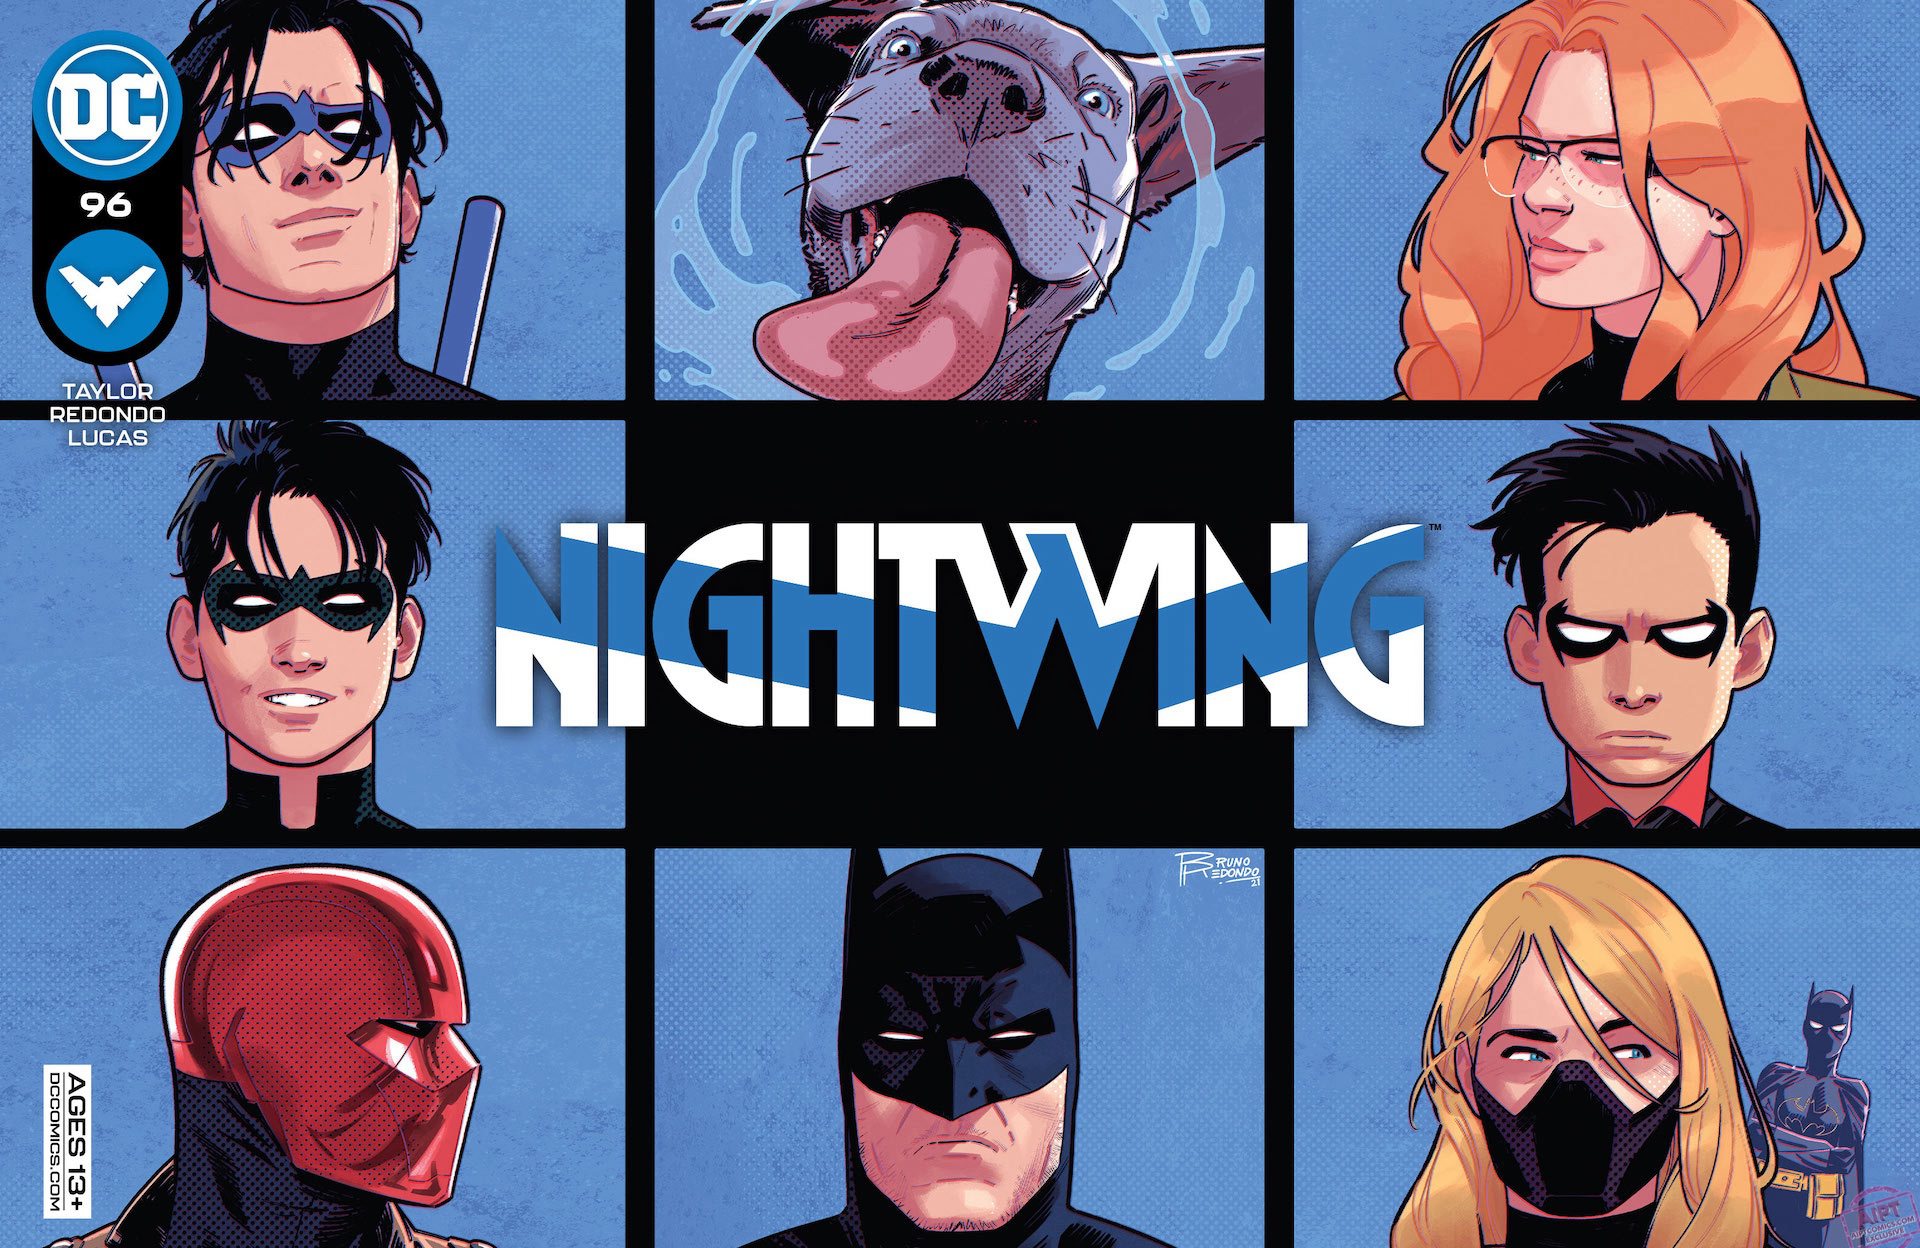 'Nightwing' #96 features a Blockbuster beatdown